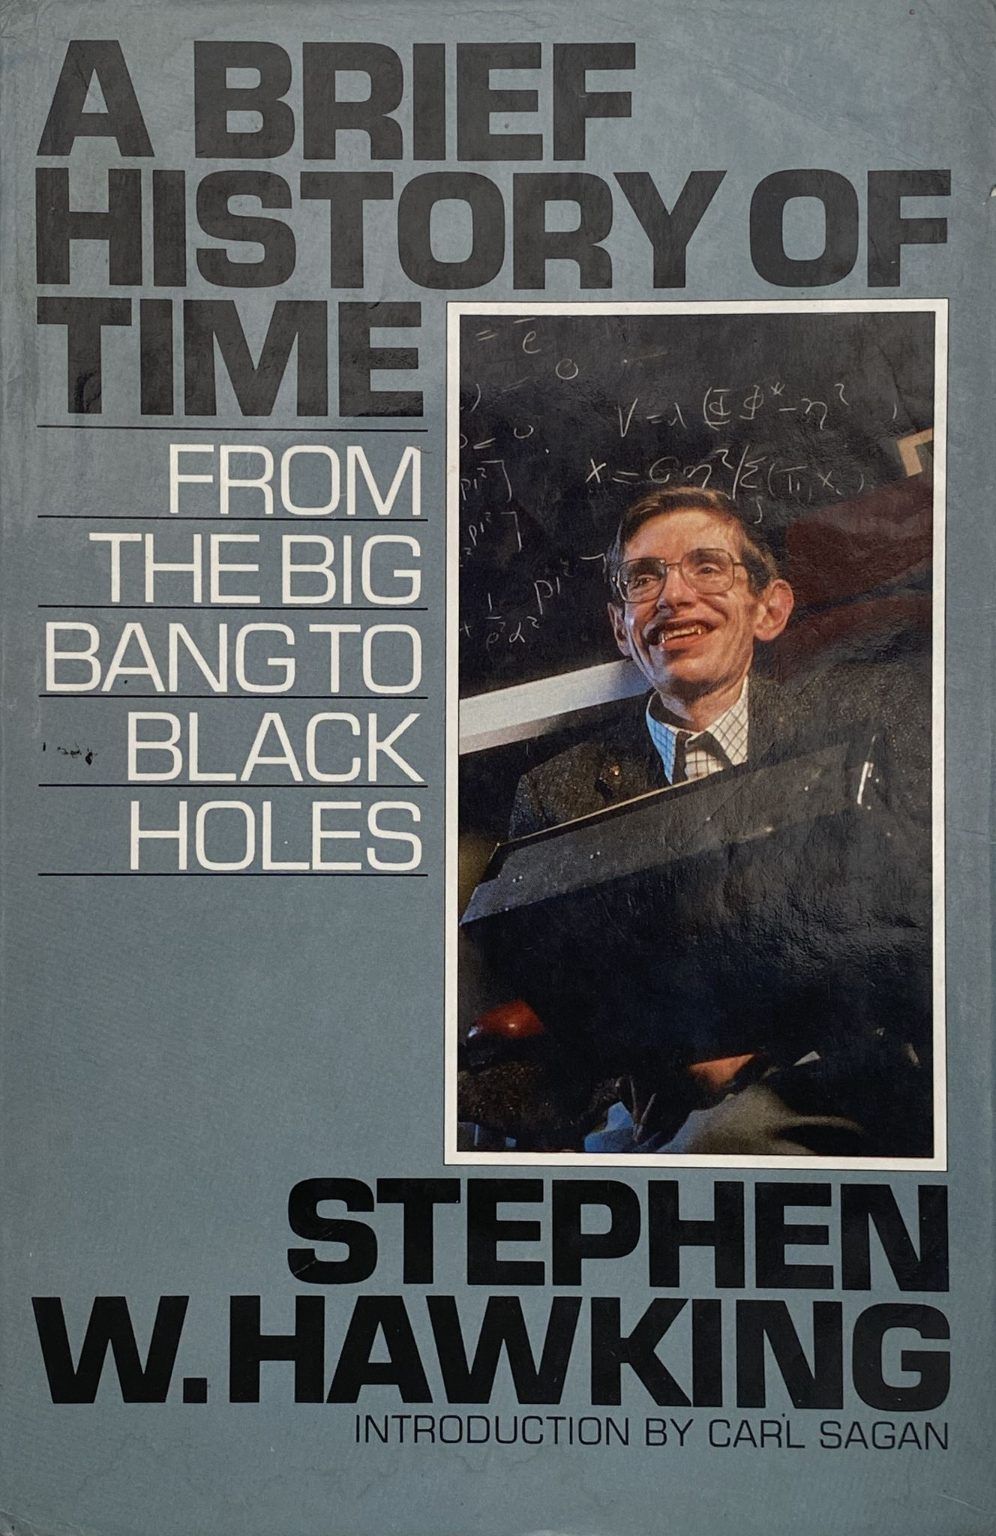 A BRIEF HISTORY OF TIME: From the Big Bang to Black Holes